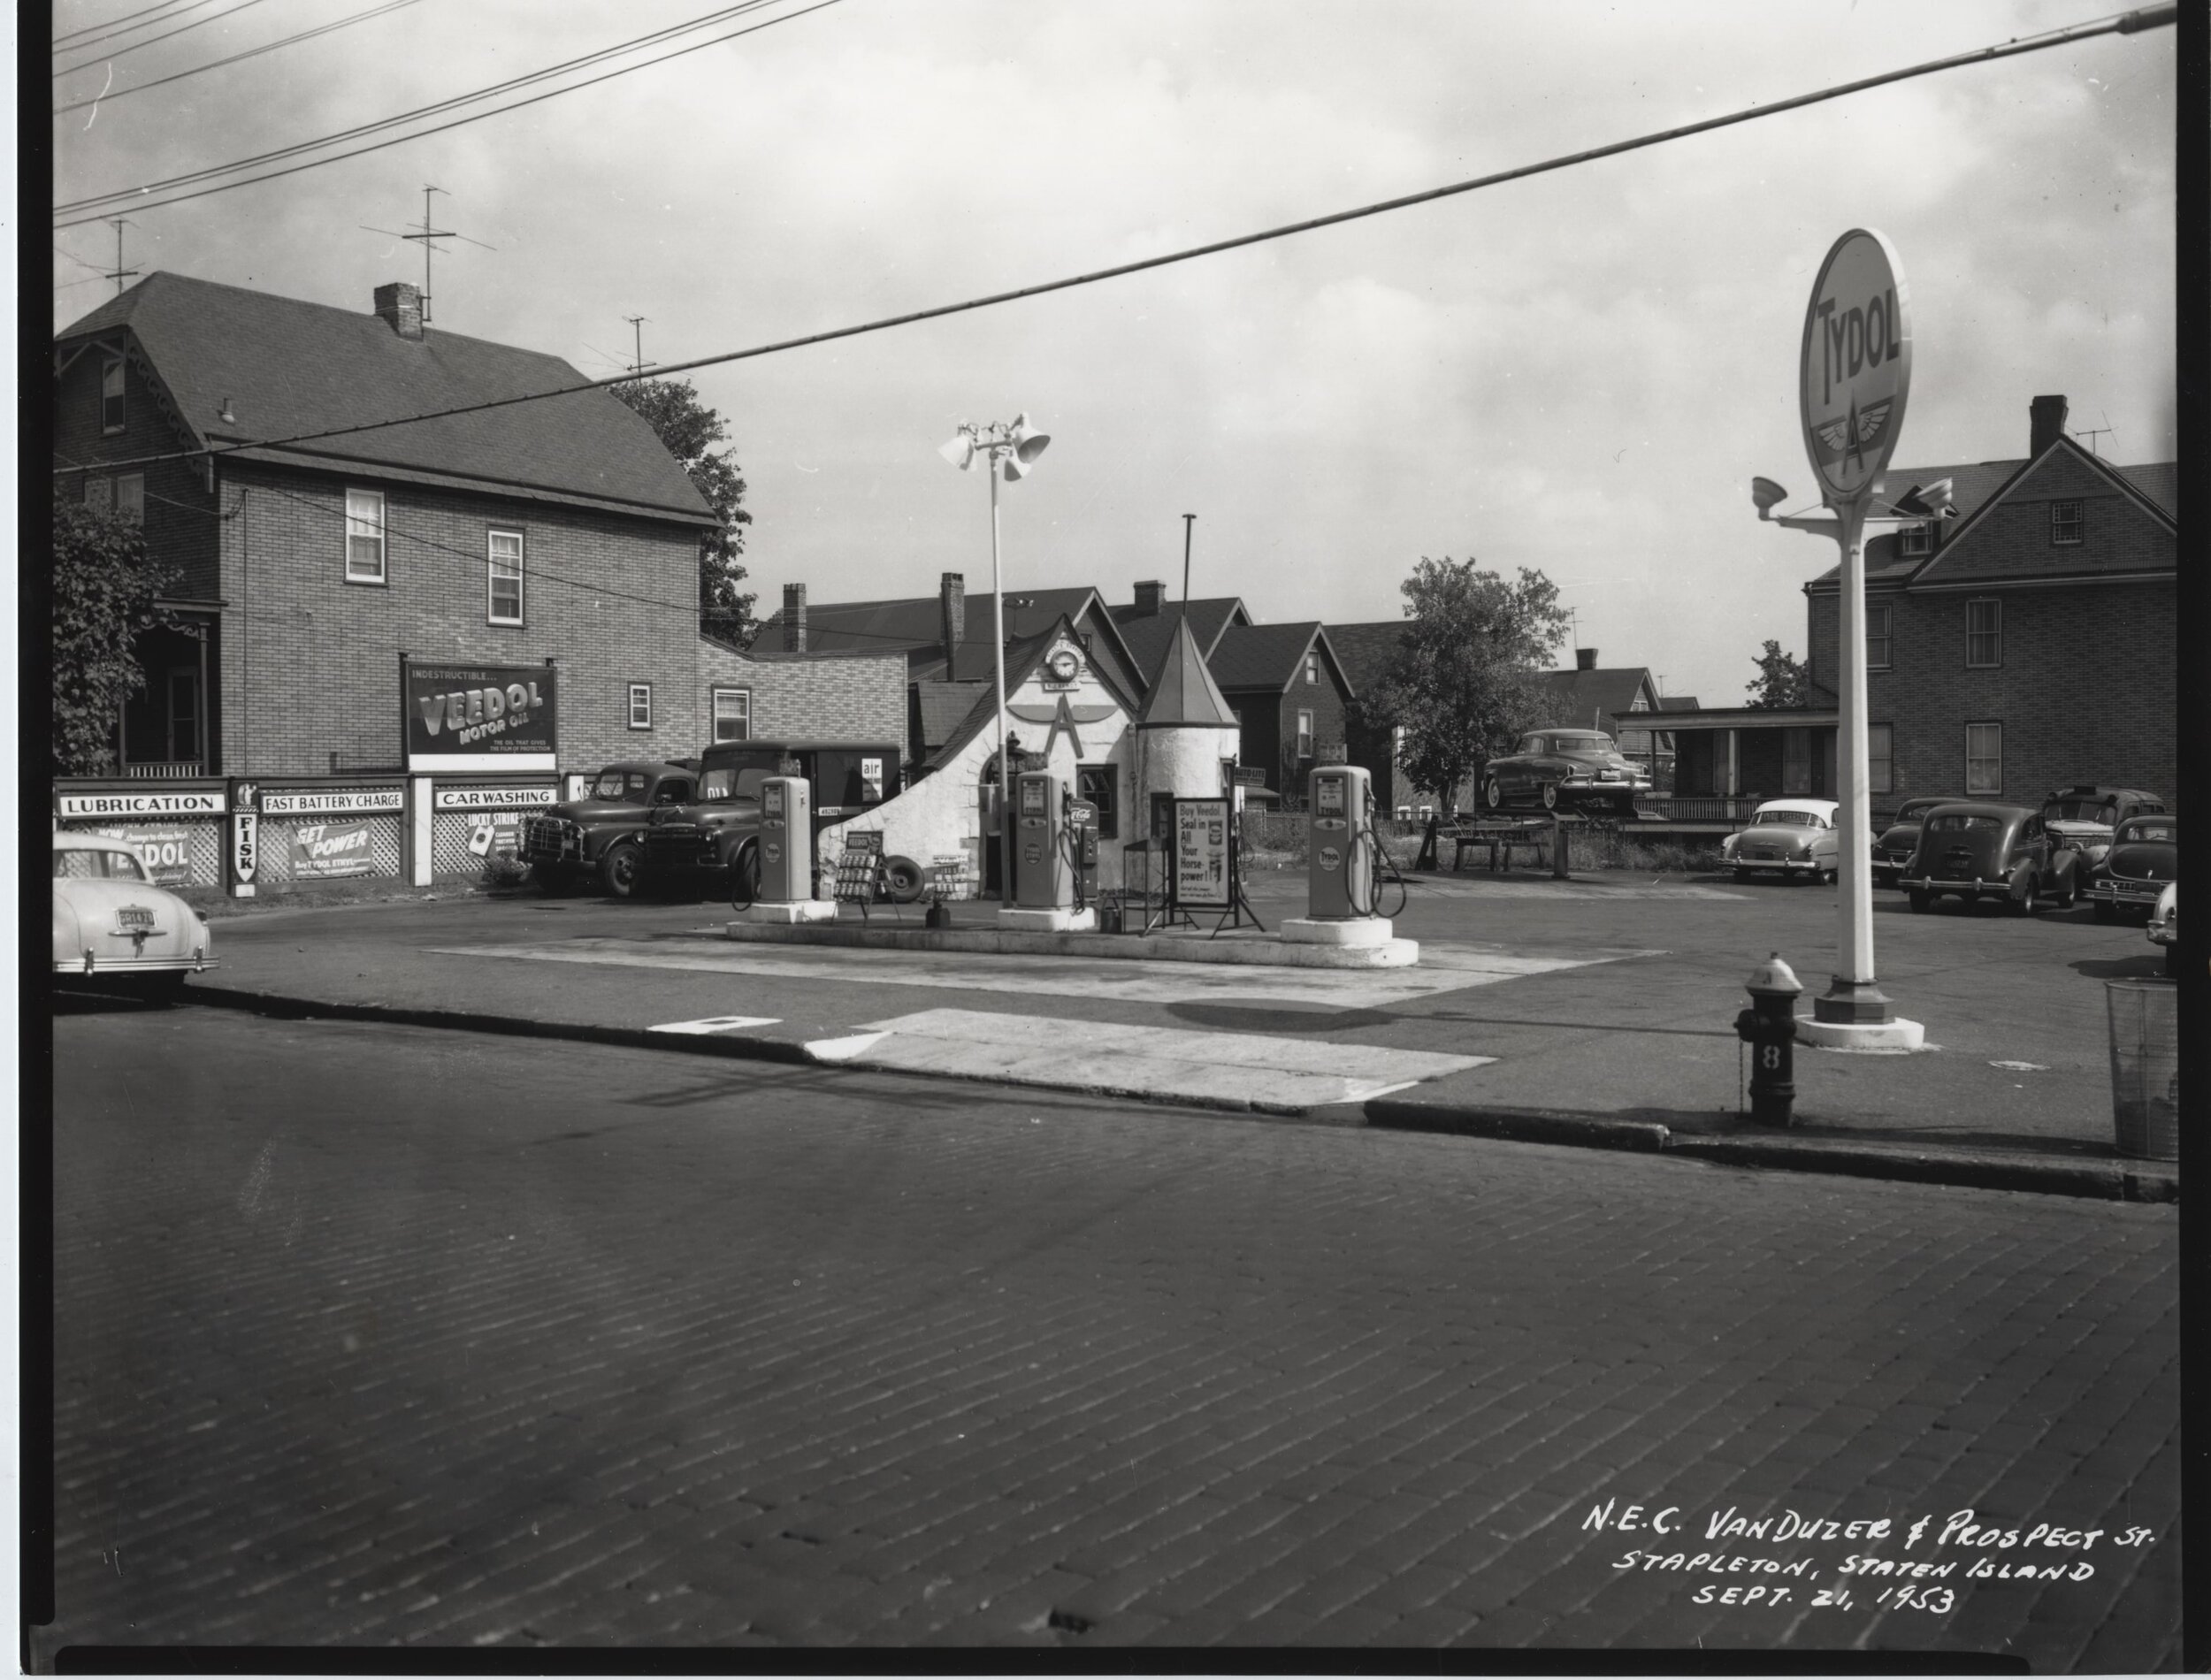 Tydol Flying A gas station, photo by Herbert A. Flamm, September 21, 1953.  (Copy)